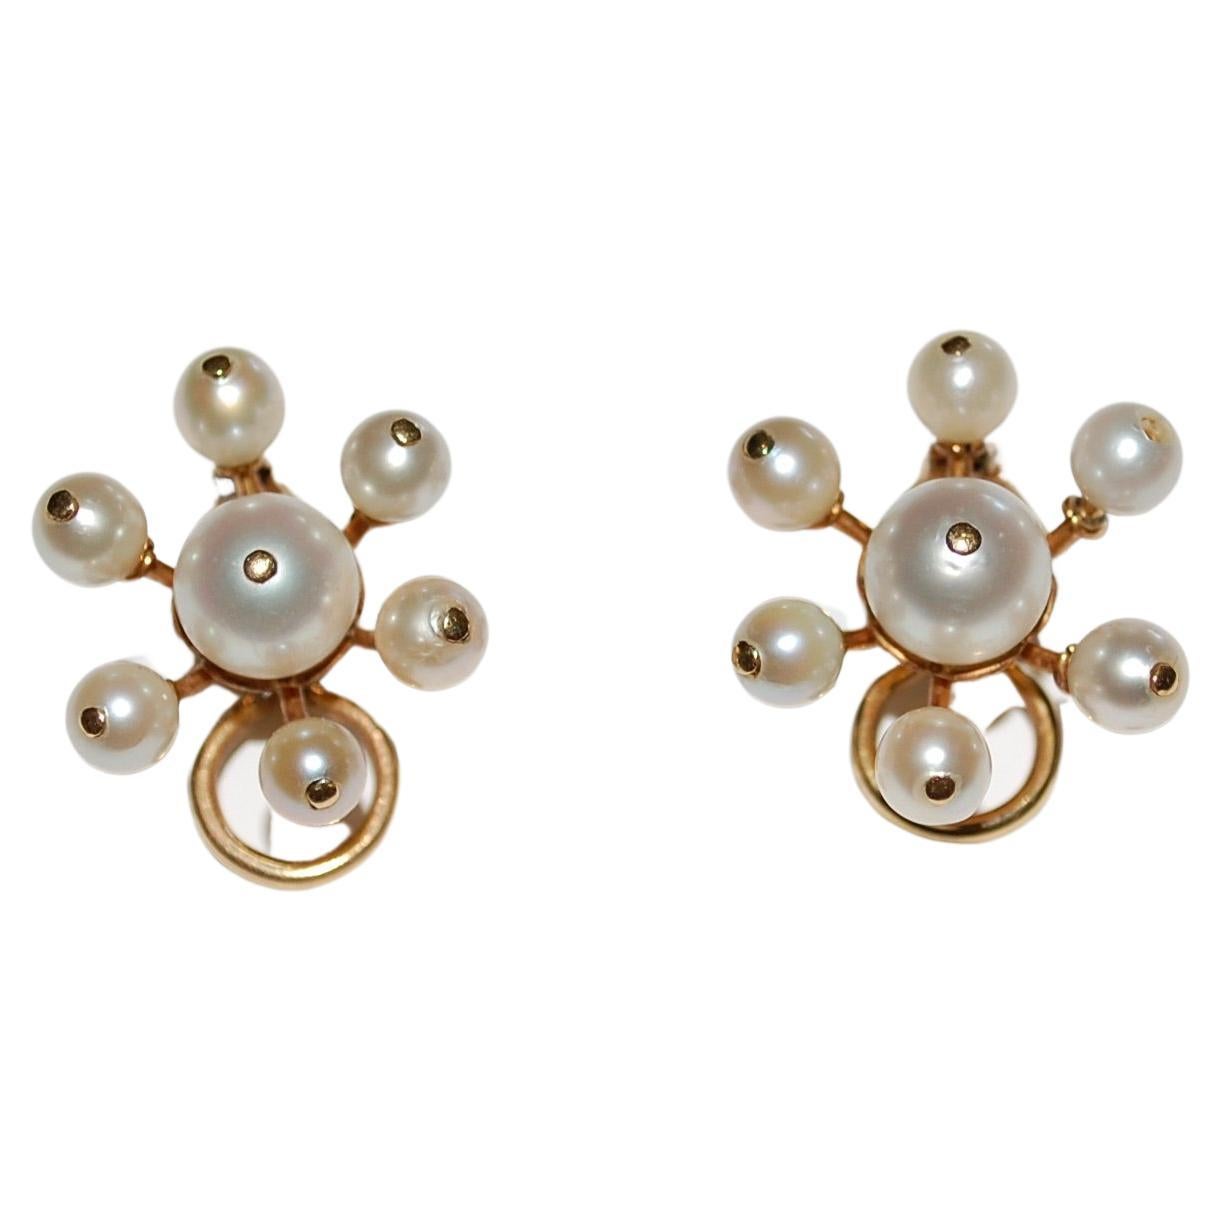 
Flower shape akoya pearl clip on earrings, unmarked tested 14k yellow gold.
Light and airy pearl earrings with a very 1950's celestial design. About 0.75 inch round. 